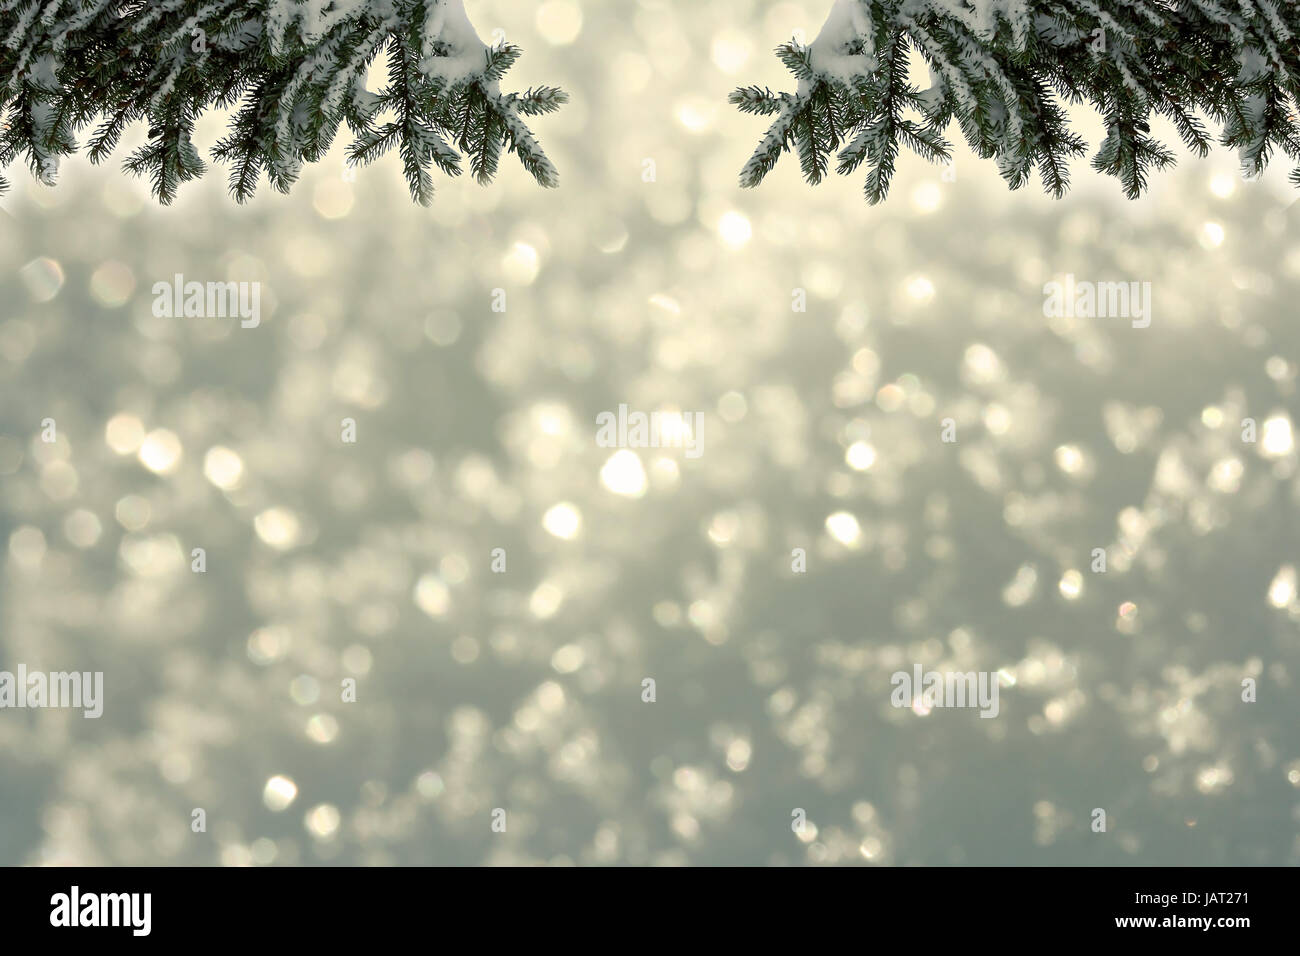 background - glittery gold and fir branches Stock Photo